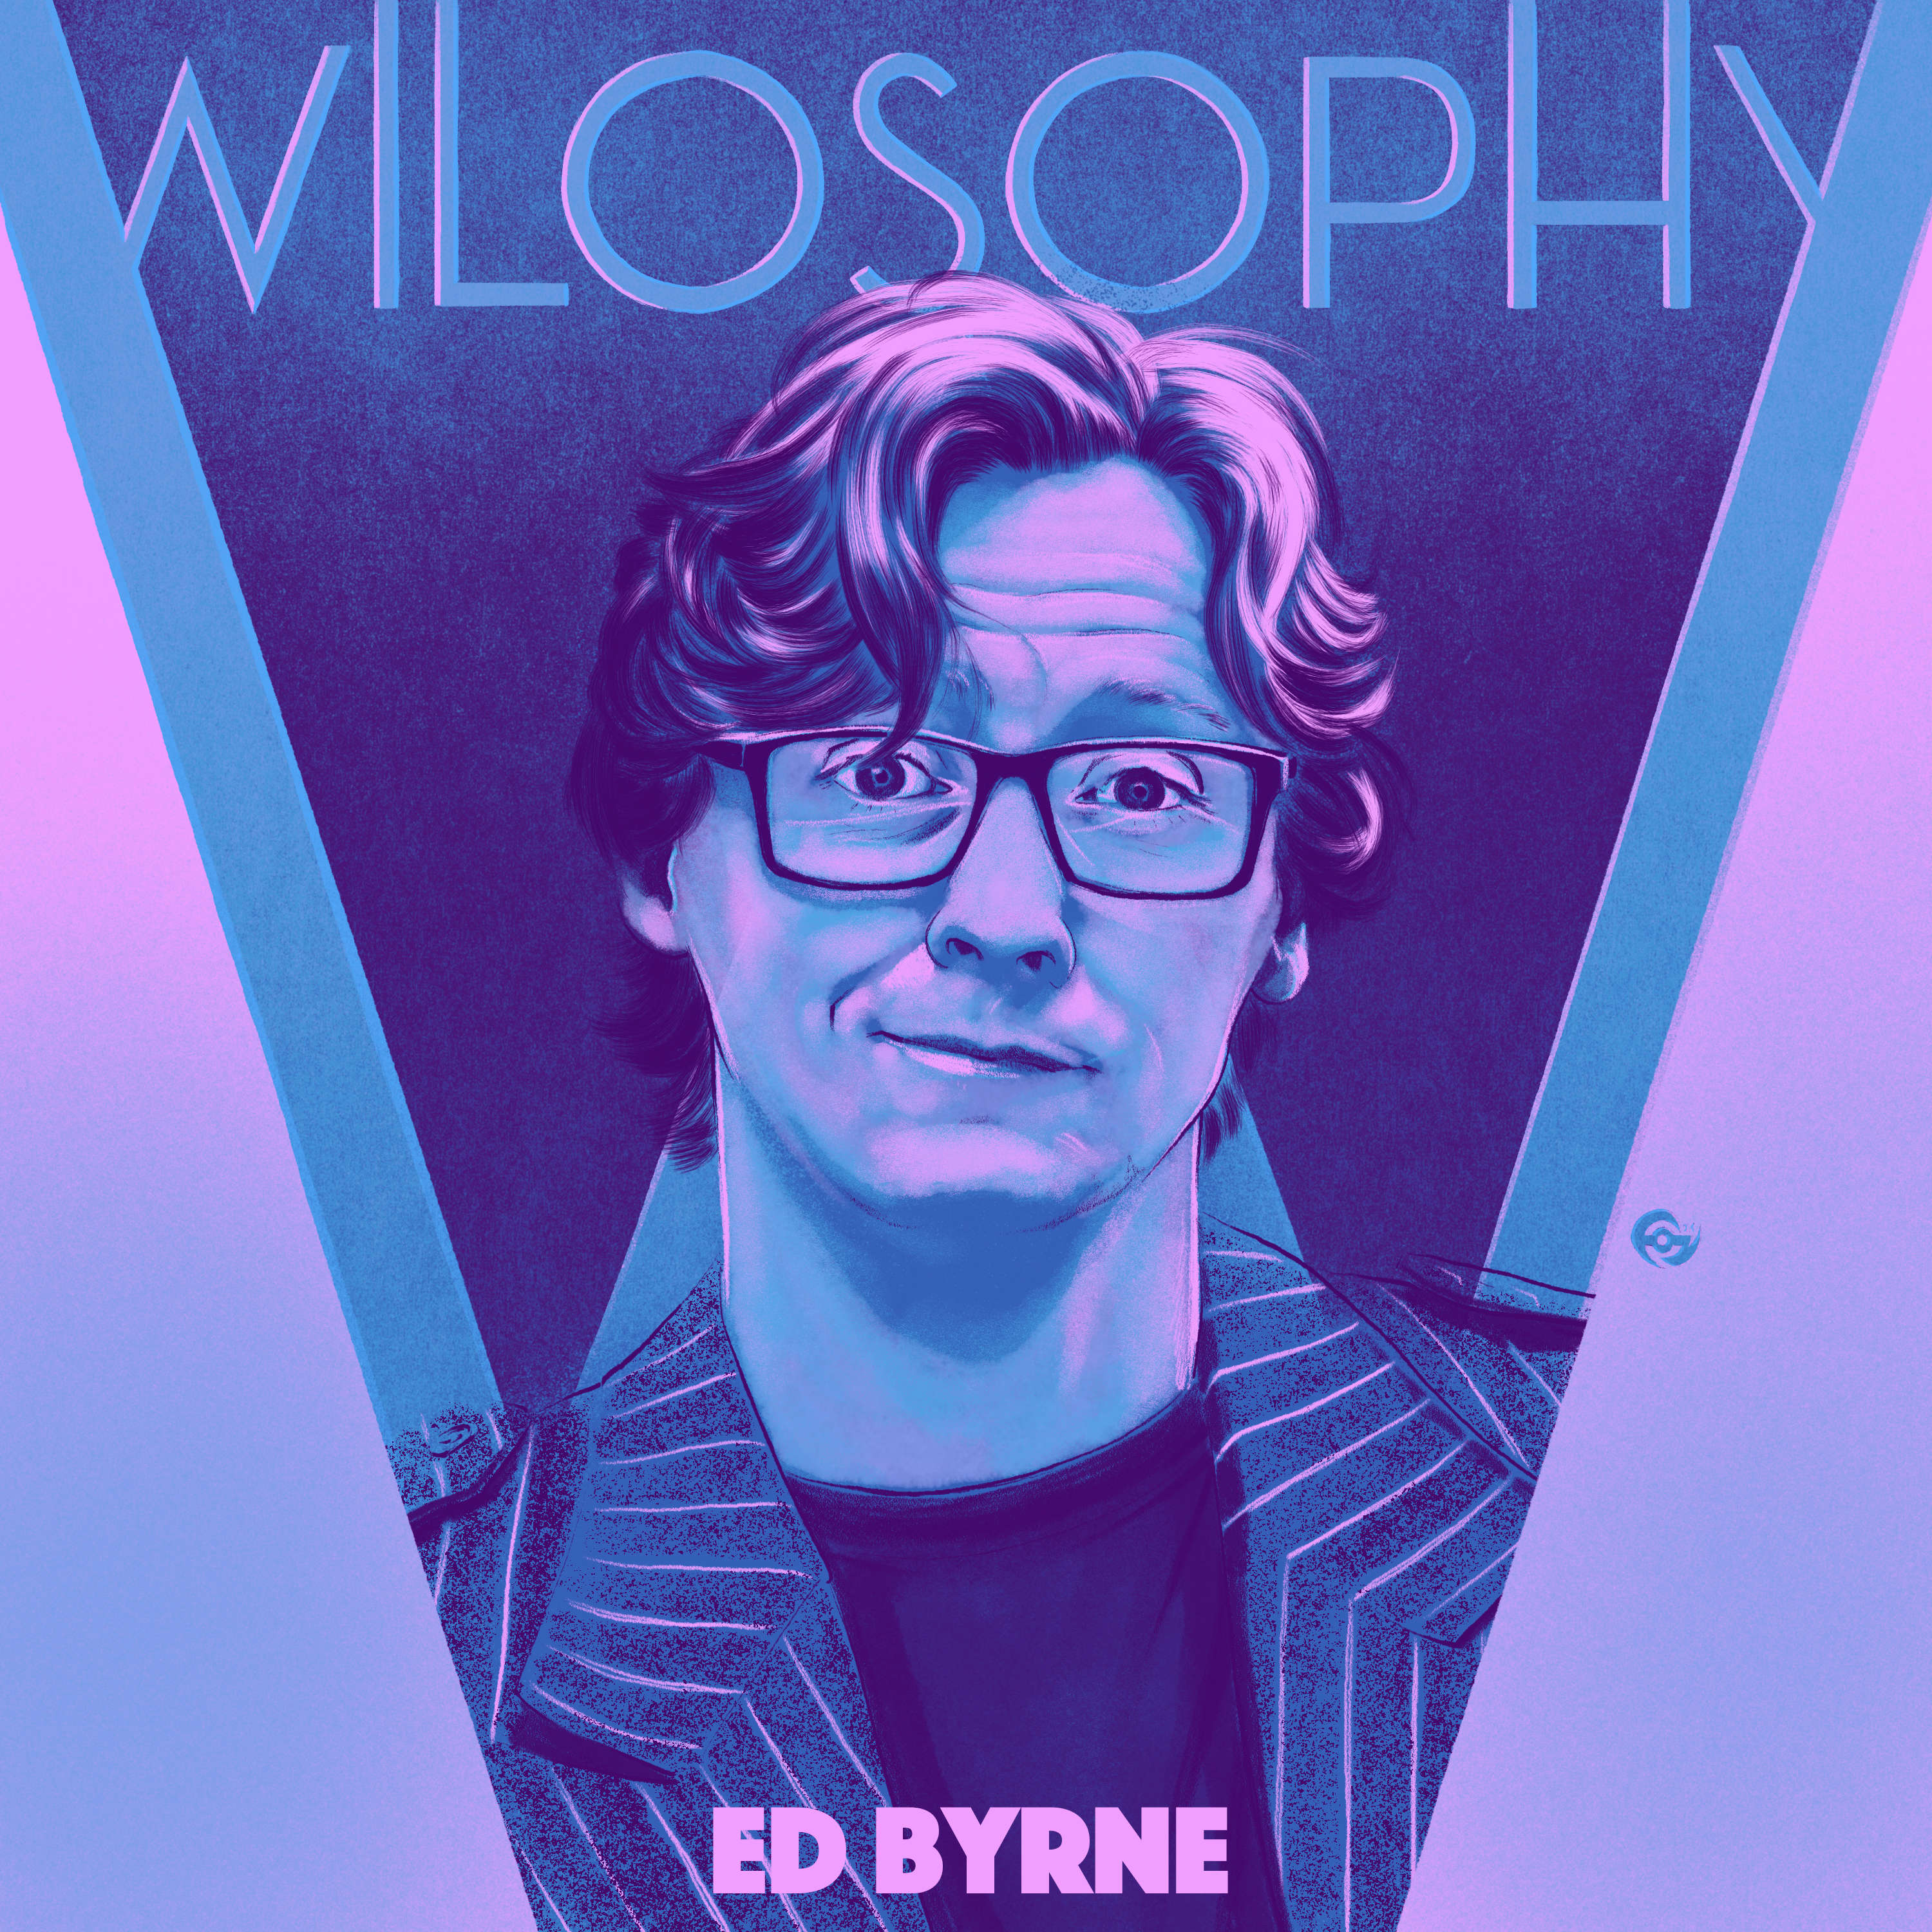 WILOSOPHY: Ed Byrne - Imagine The Other Person's Point Of View, Always.